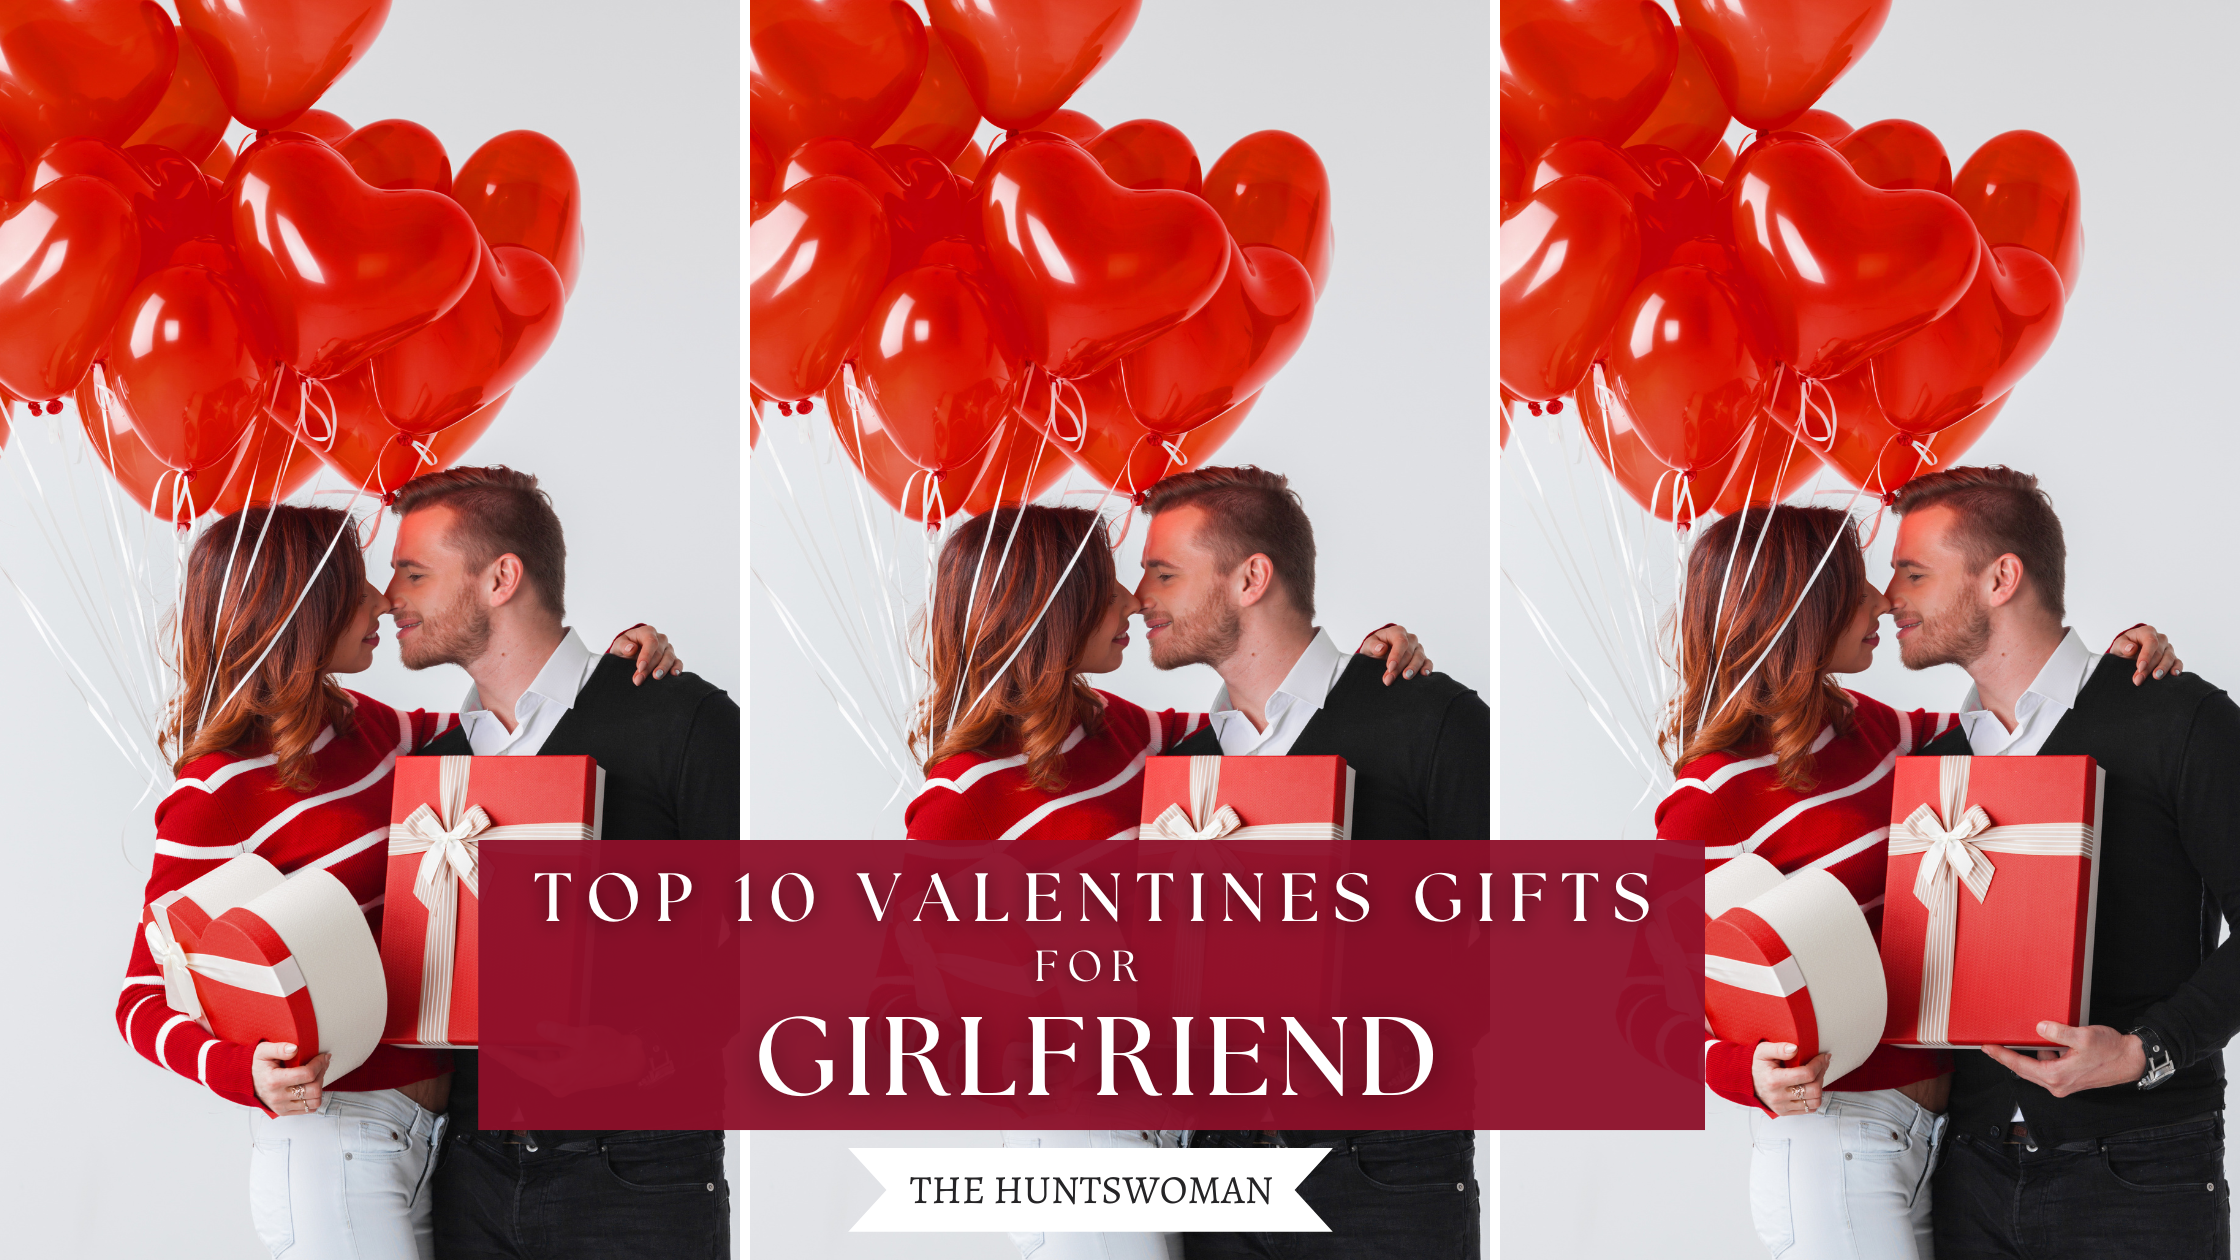 https://thehuntswoman.com/wp-content/uploads/2023/01/top-10-valentine-gifts-for-girlfriend.png